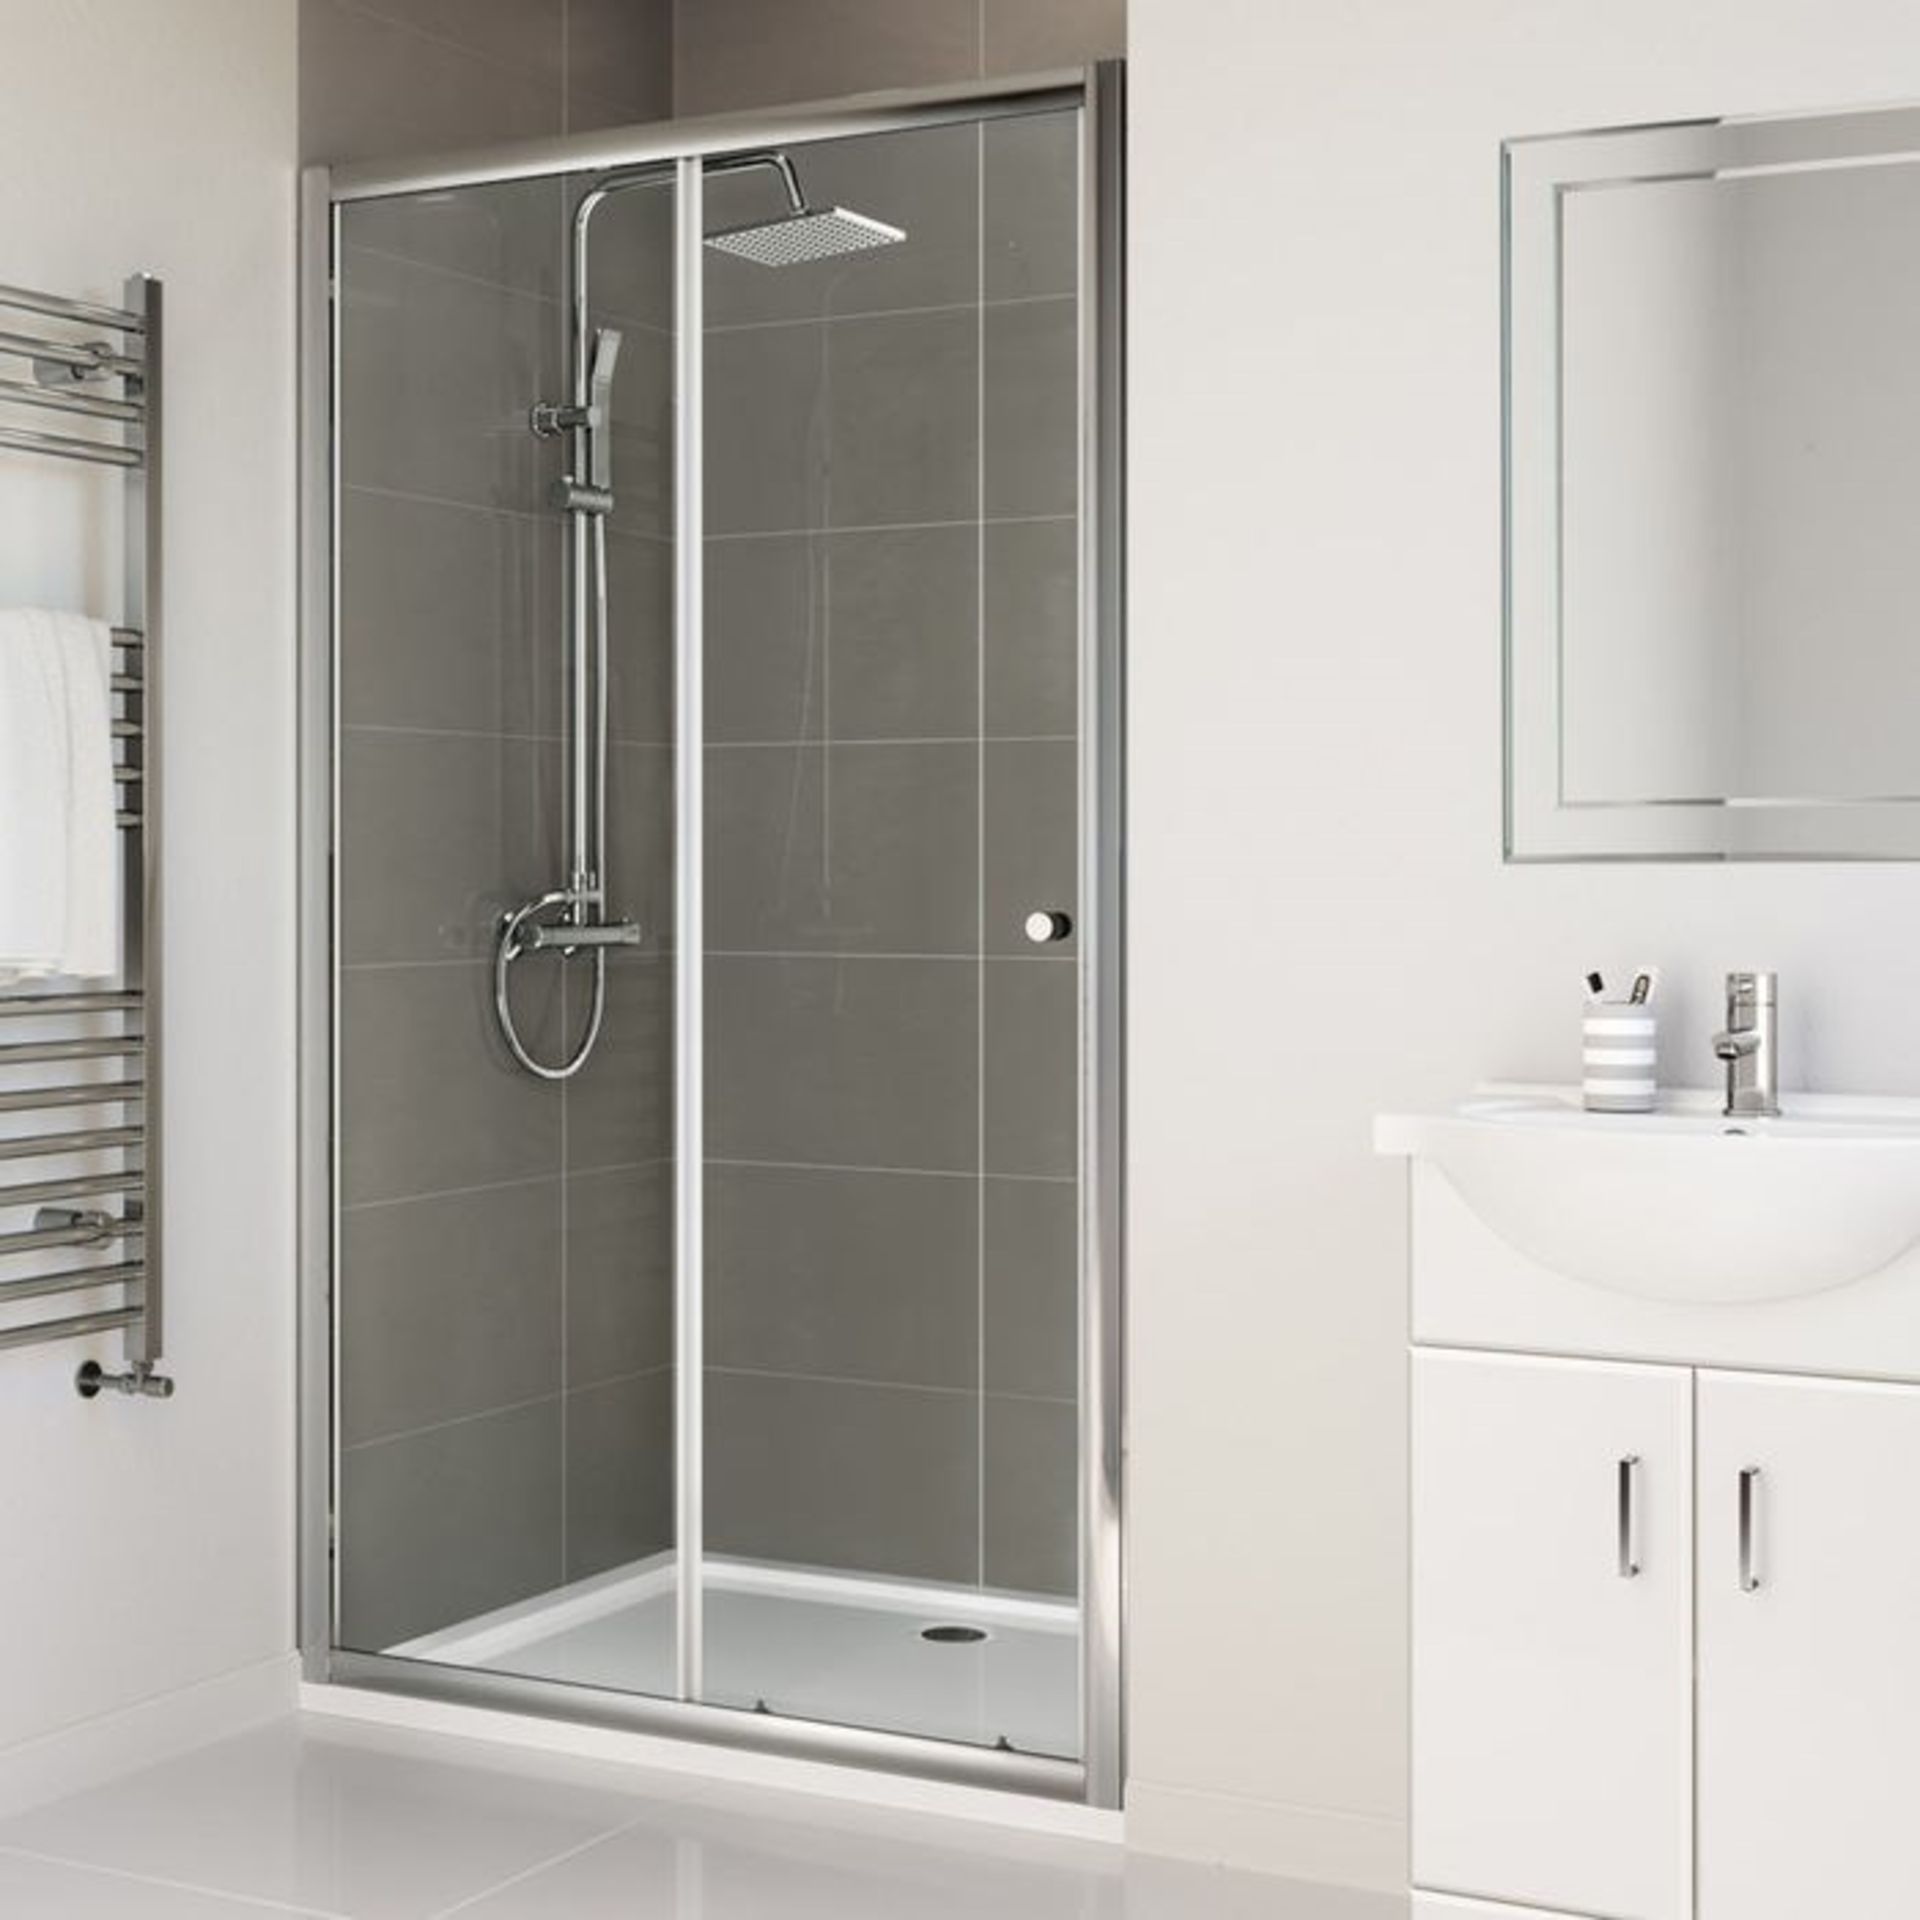 NEW & BOXED Twyfords 1600mm - Elements Sliding Shower Door. RRP £399.99.8mm Safety Glass Full...